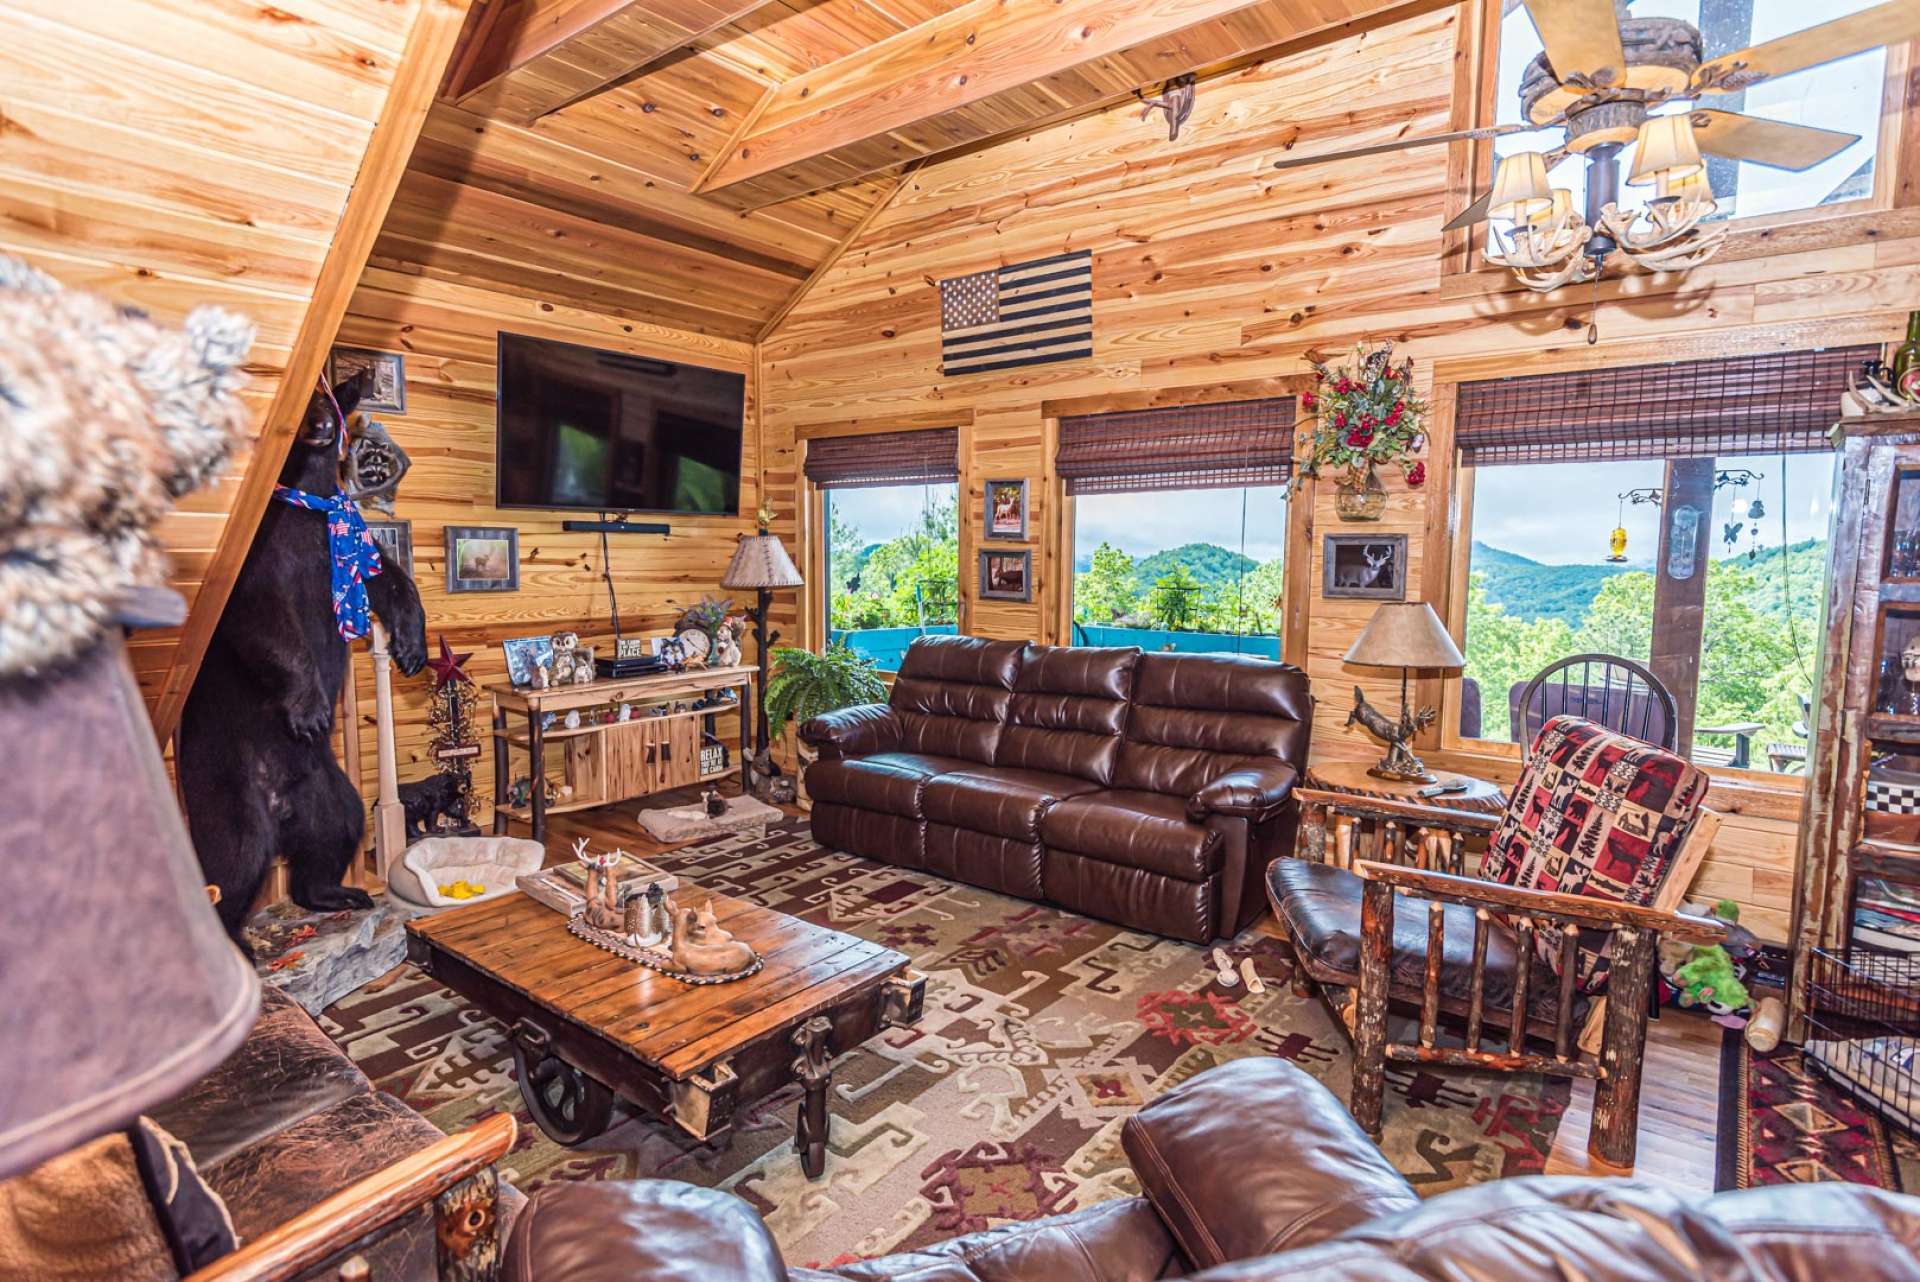 The vaulted great room features cedar covered exposed beams, cedar ceiling, wood floor, and abundant windows filling the cabin with natural light.